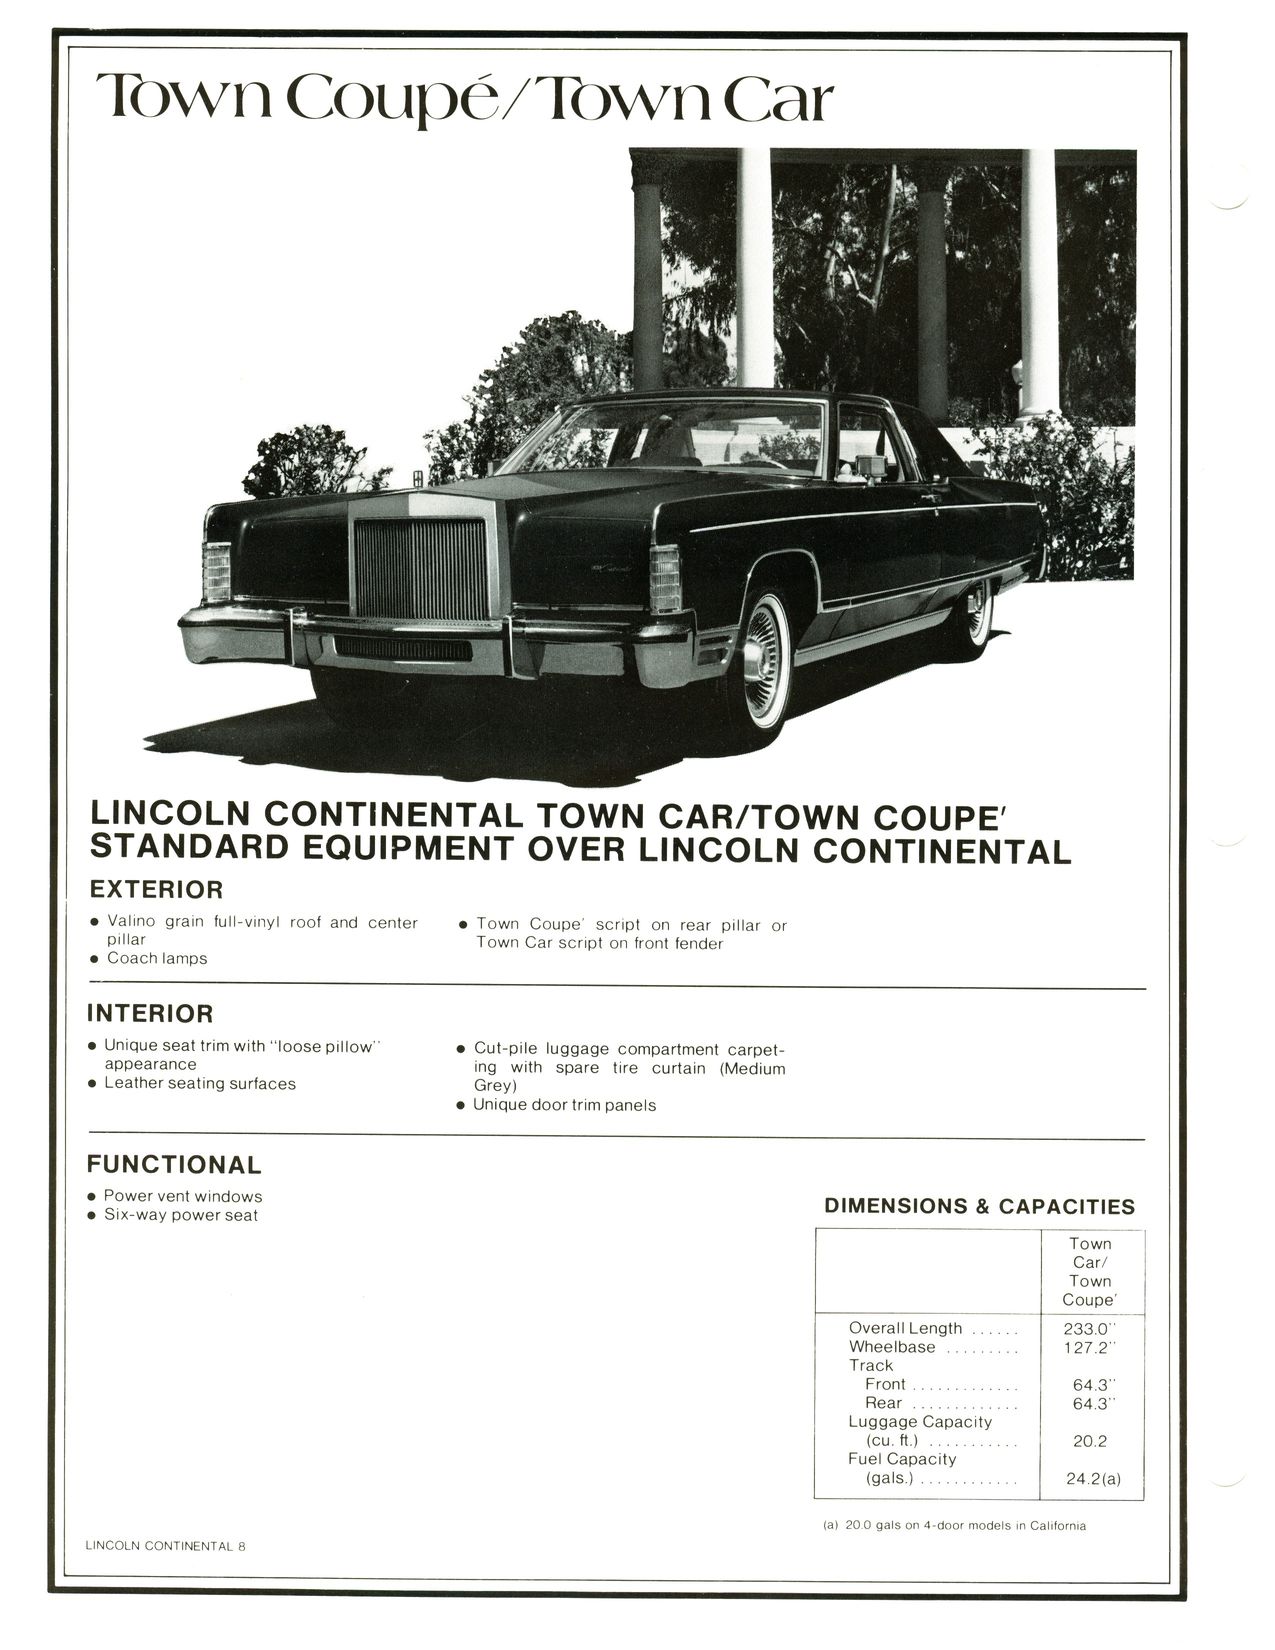 1977 Continental Product Facts Book-2-08